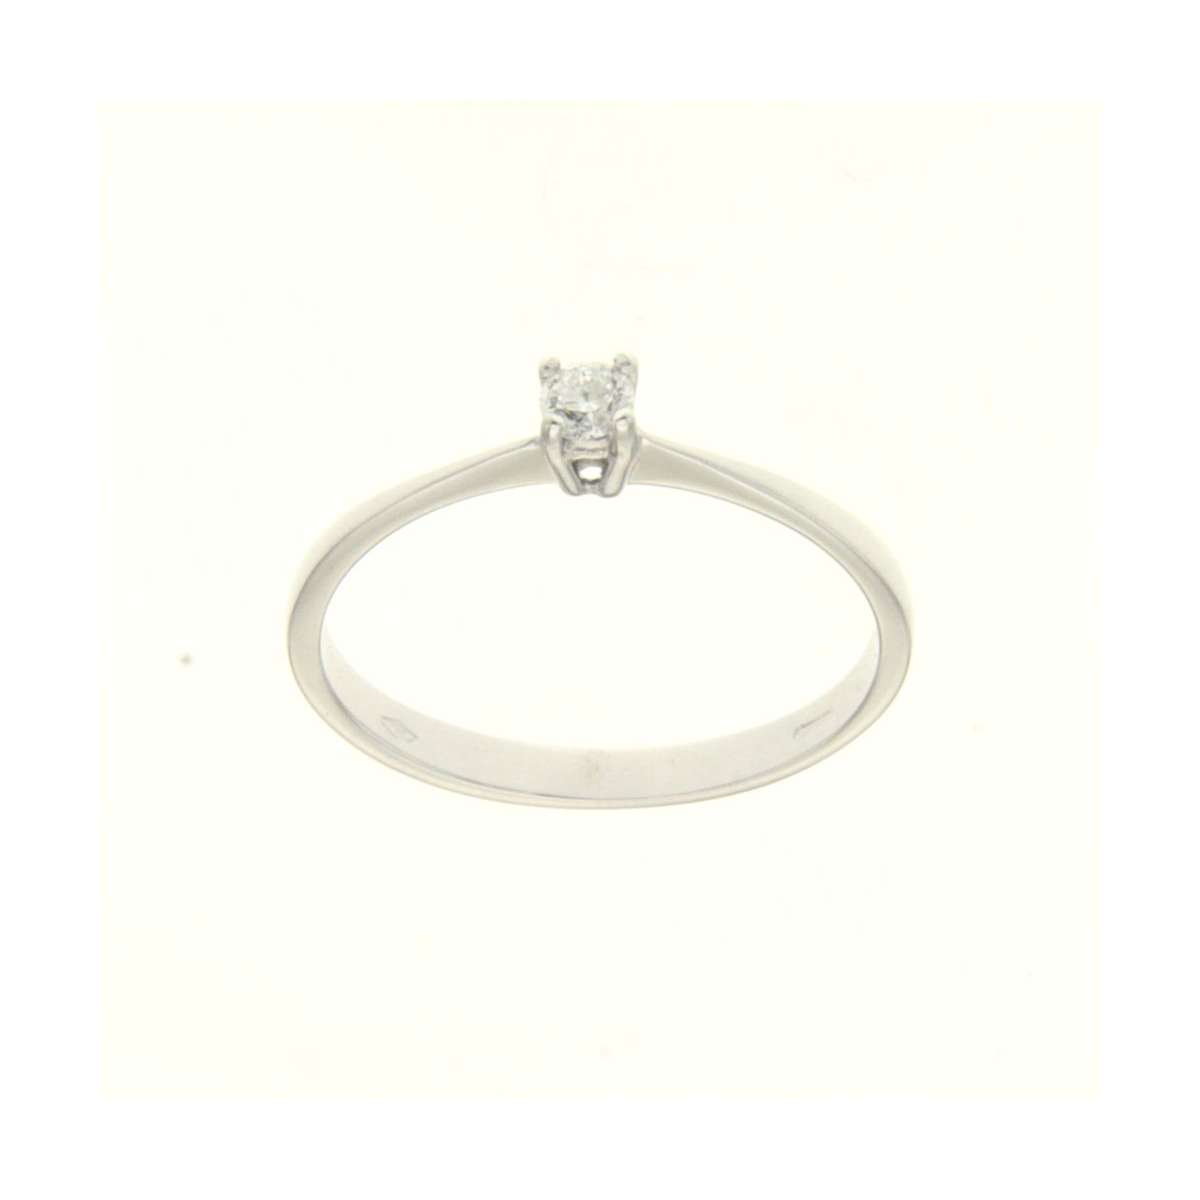 White gold solitaire ring with hrd certified diamond carat 0.08 D-VS1